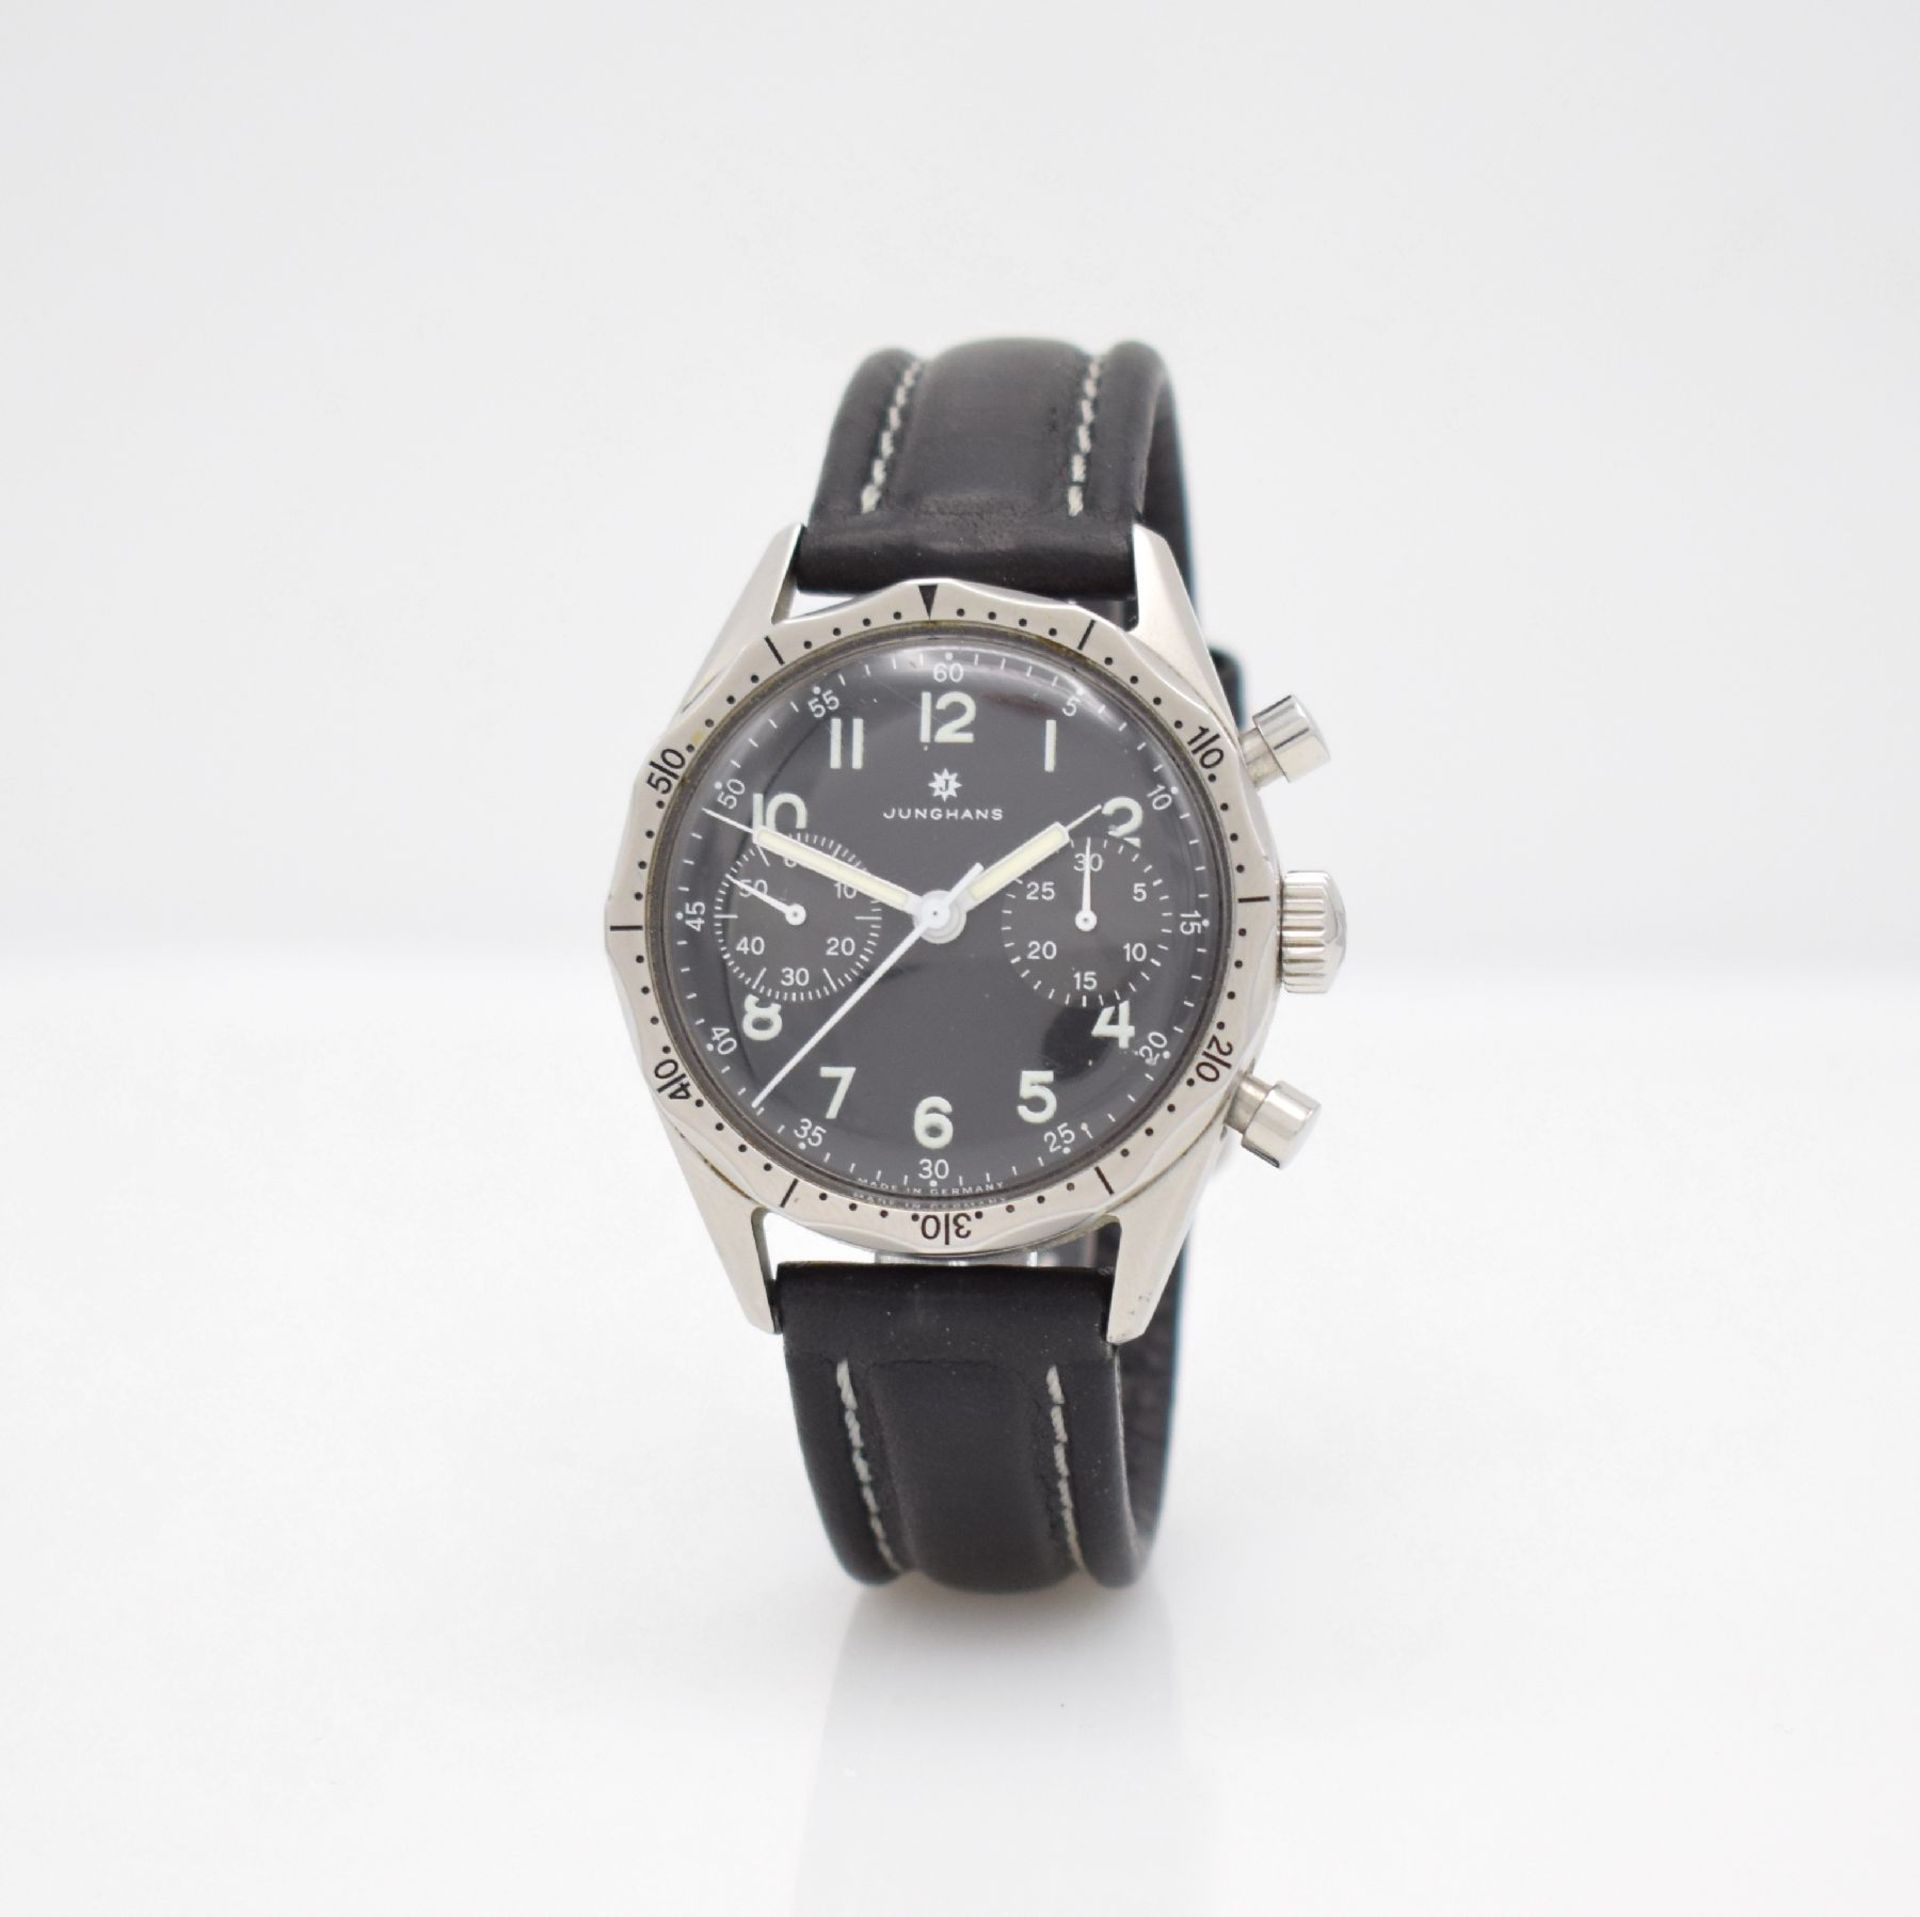 JUNGHANS Pilot chronograph, manual winding, Germany around 2000, reference 27/3850, design from - Bild 3 aus 8